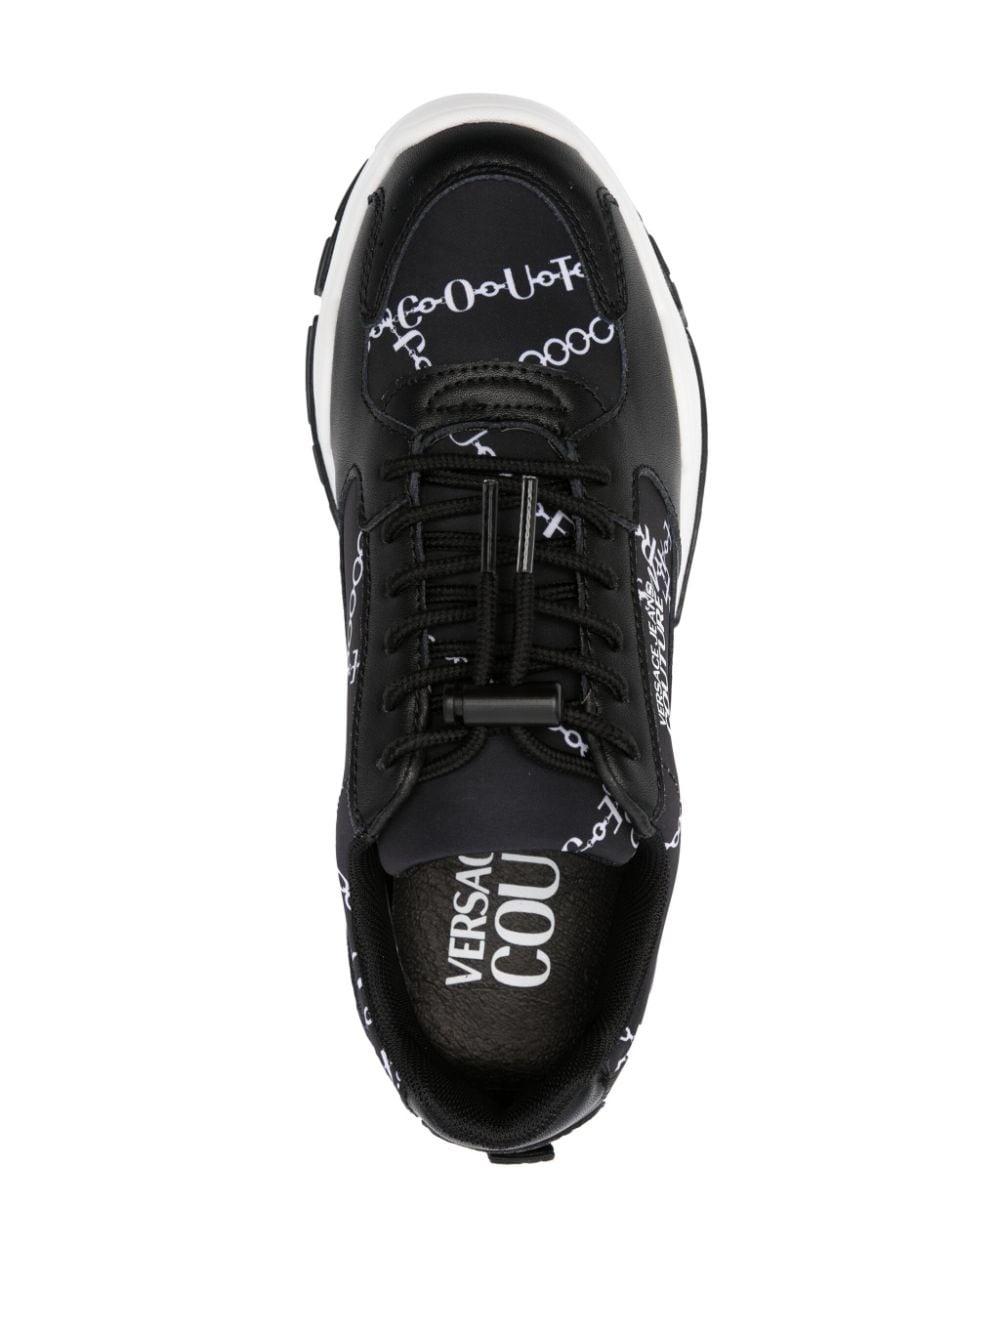 chain-link print panelled sneakers - 4